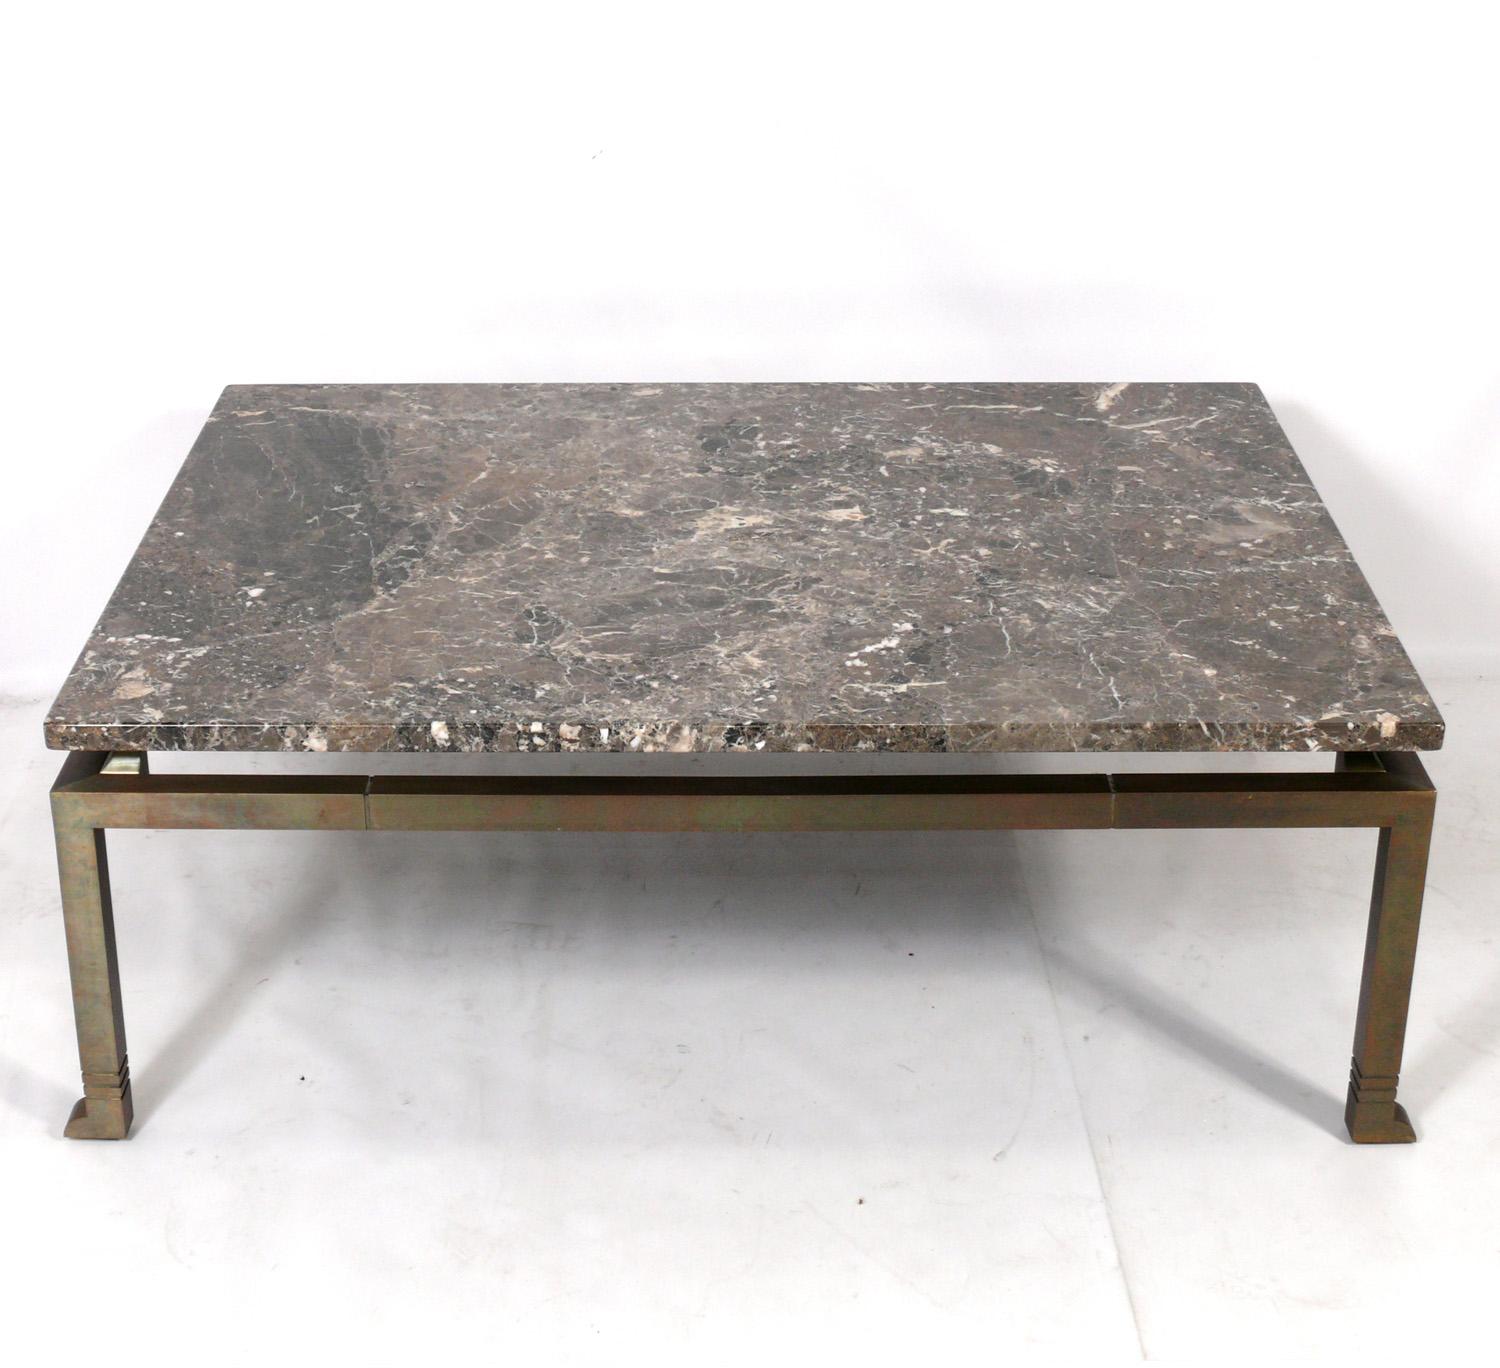 Large scale marble and bronze coffee table, in the manner of Marc du Plantier, France, circa 2000s. Based on a 1930s Art Deco design by Marc du Plantier, this table was constructed in France and retailed through Lorin Marsh in NYC. This custom